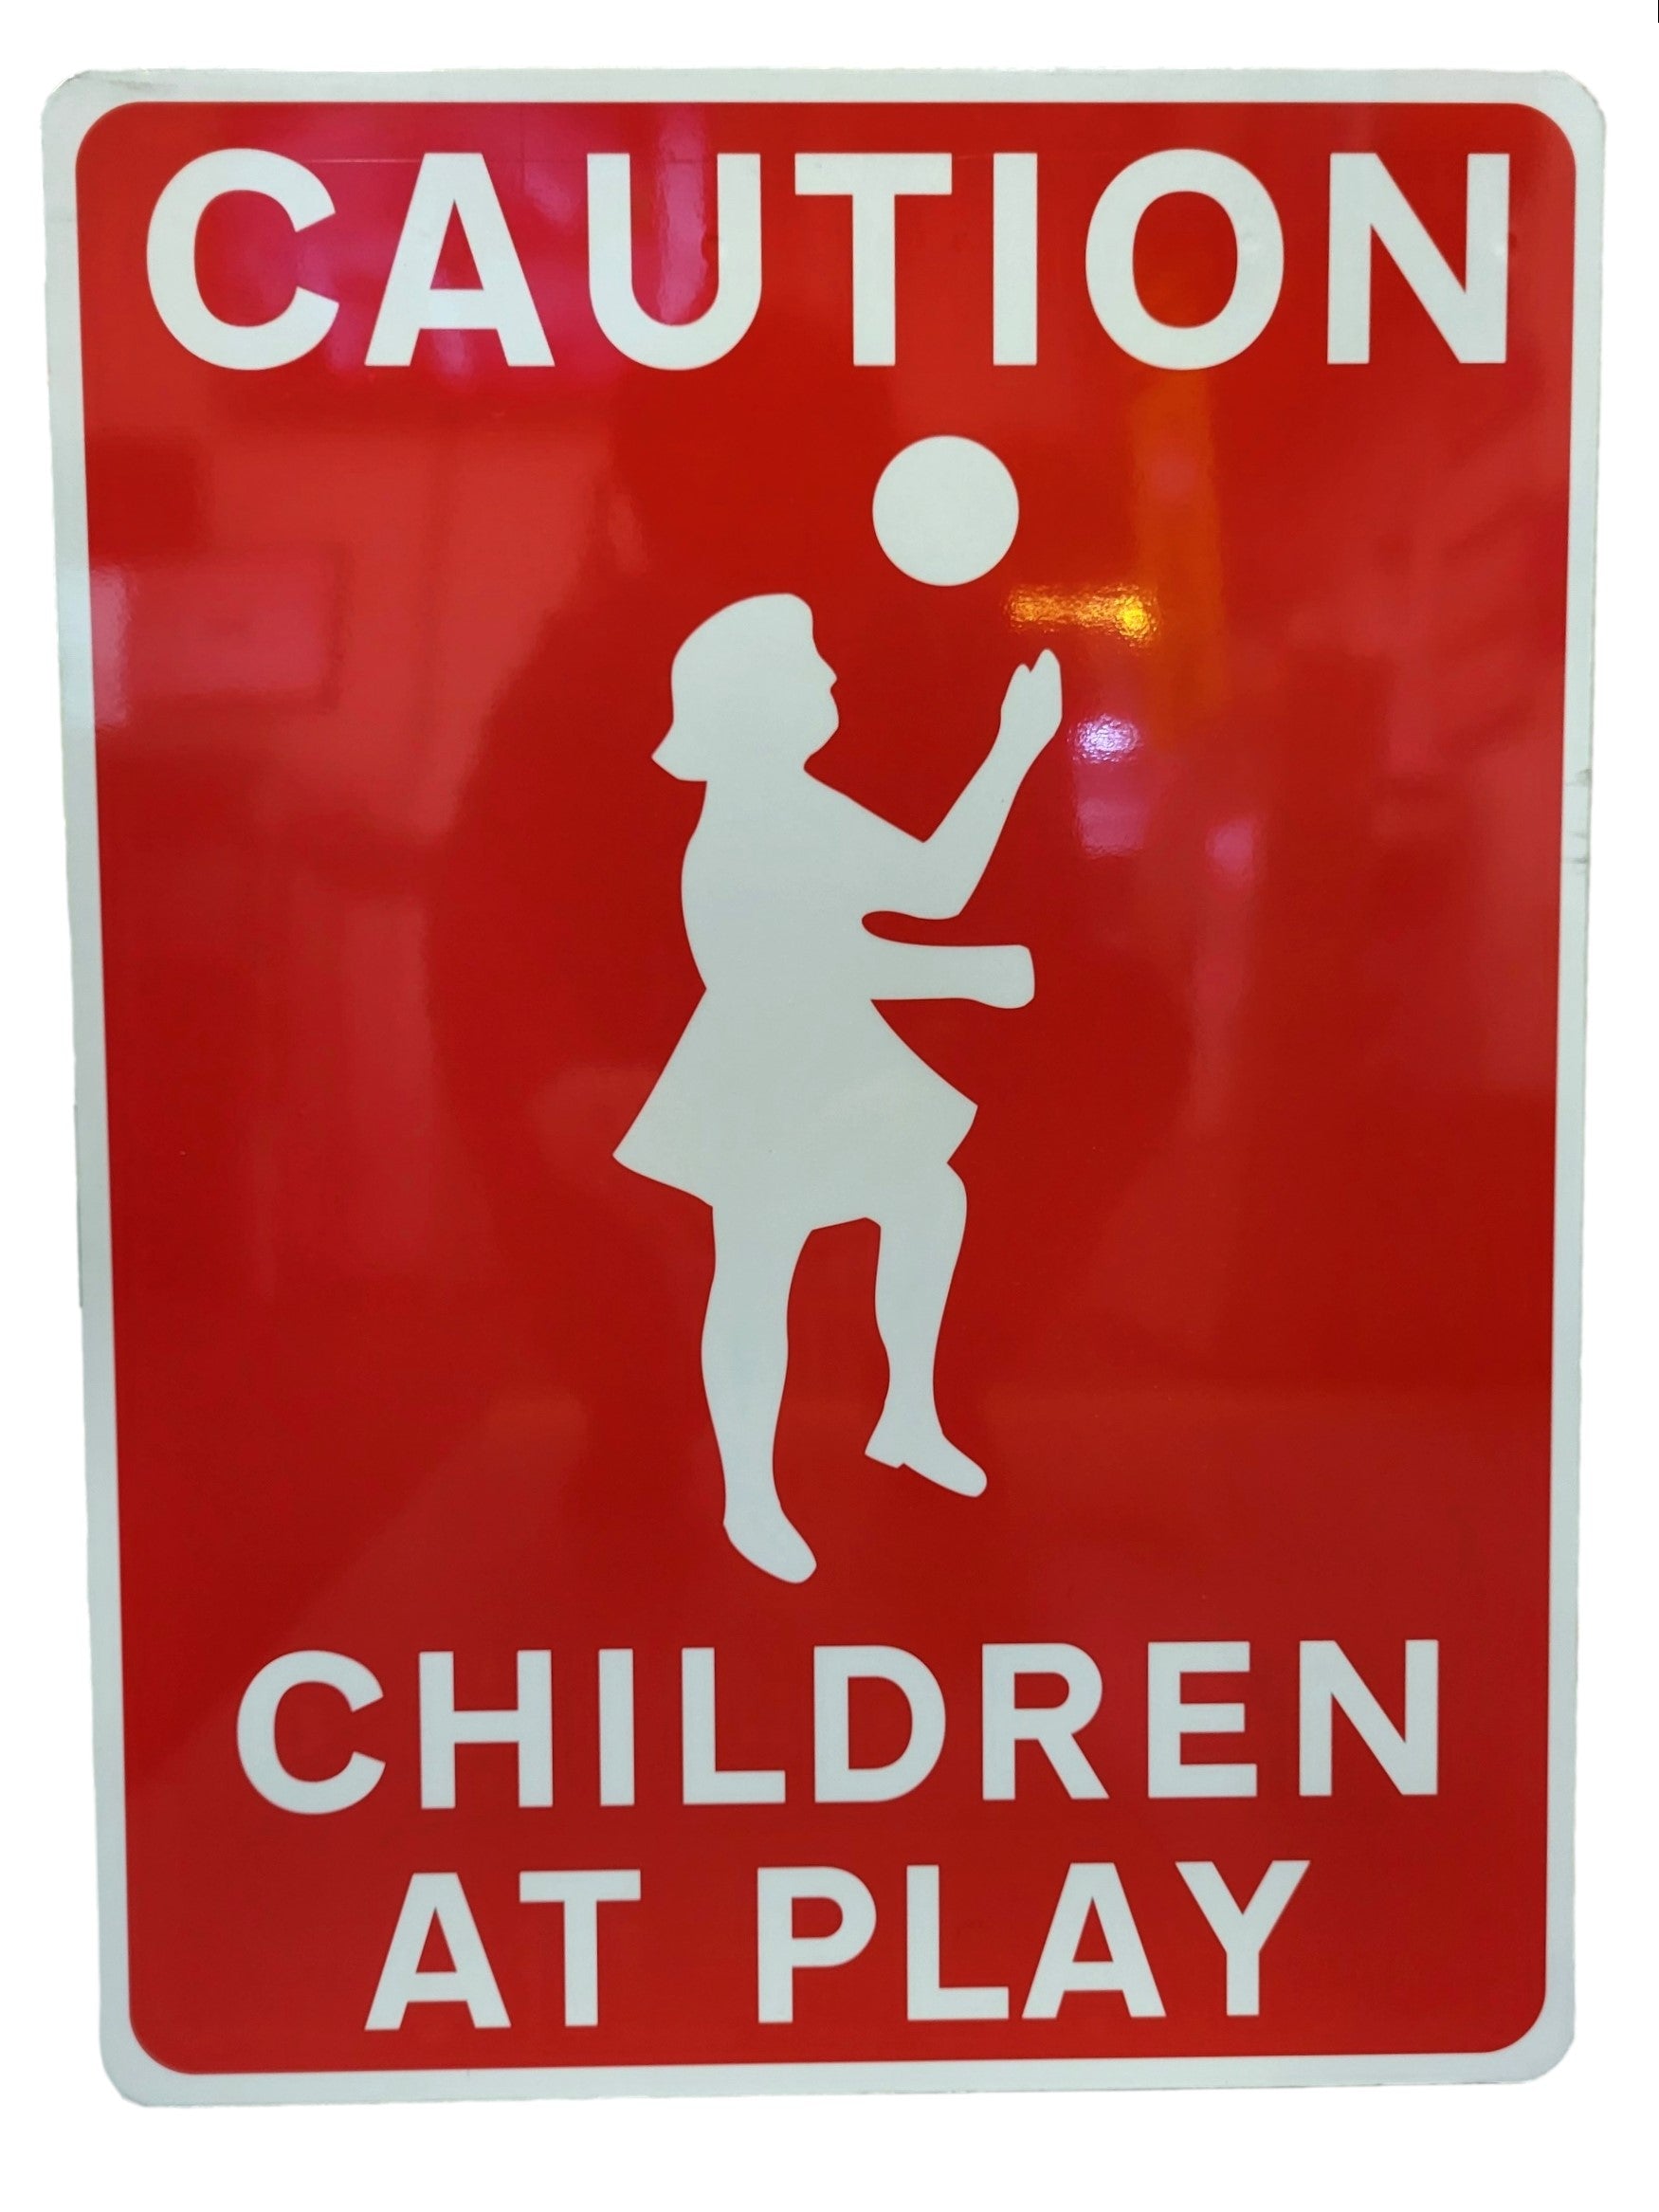 Caution Children At Play Sign